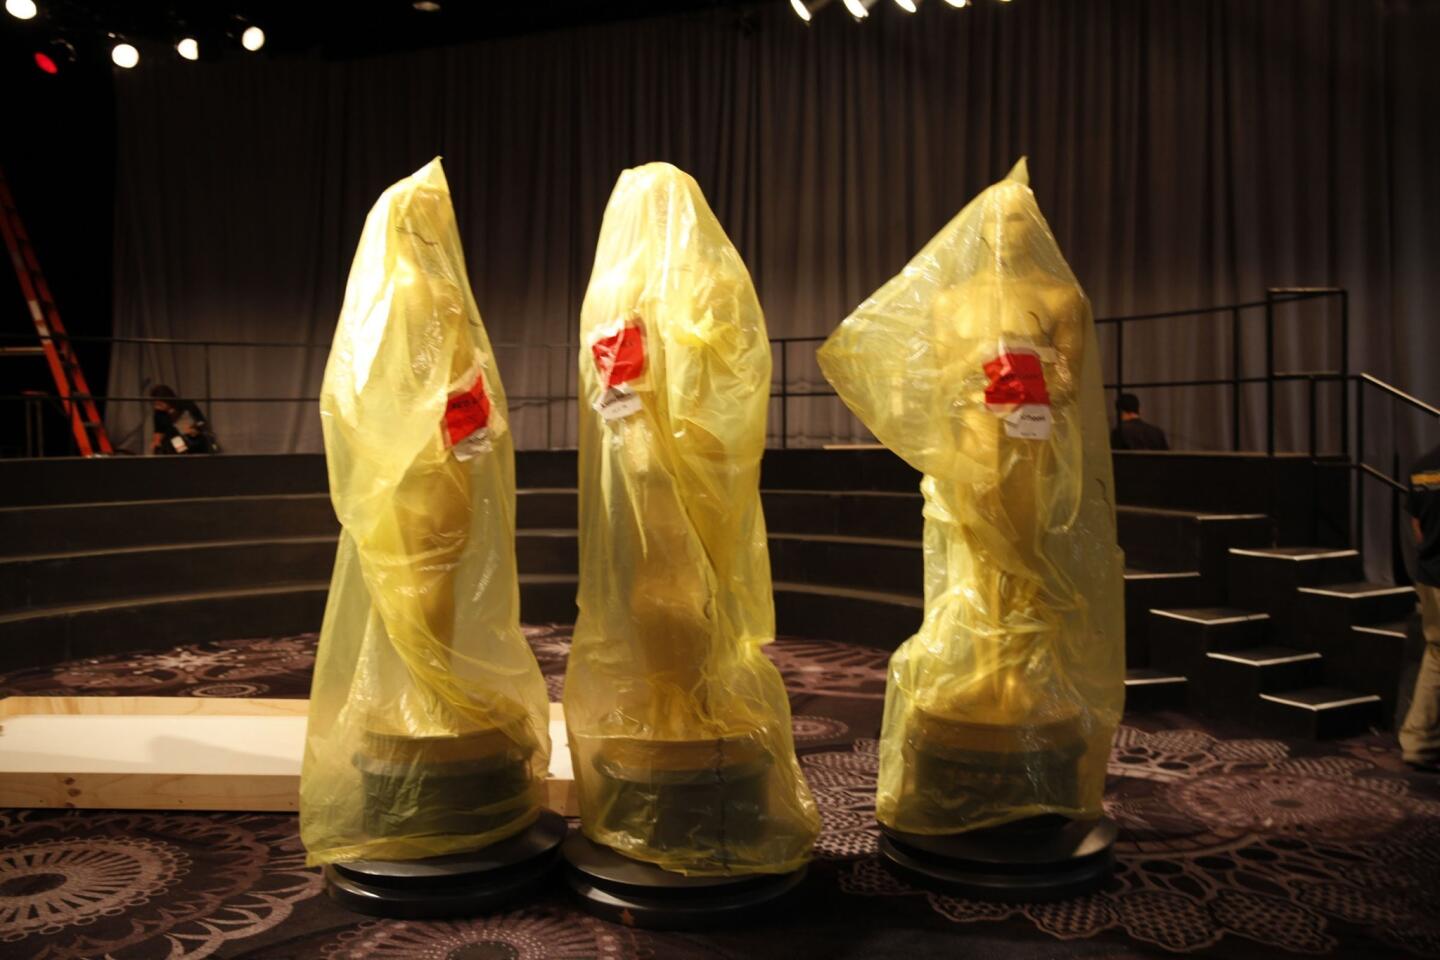 It's a wrap for the giant Oscar statuettes at the nominee luncheon at the Beverly Hilton.